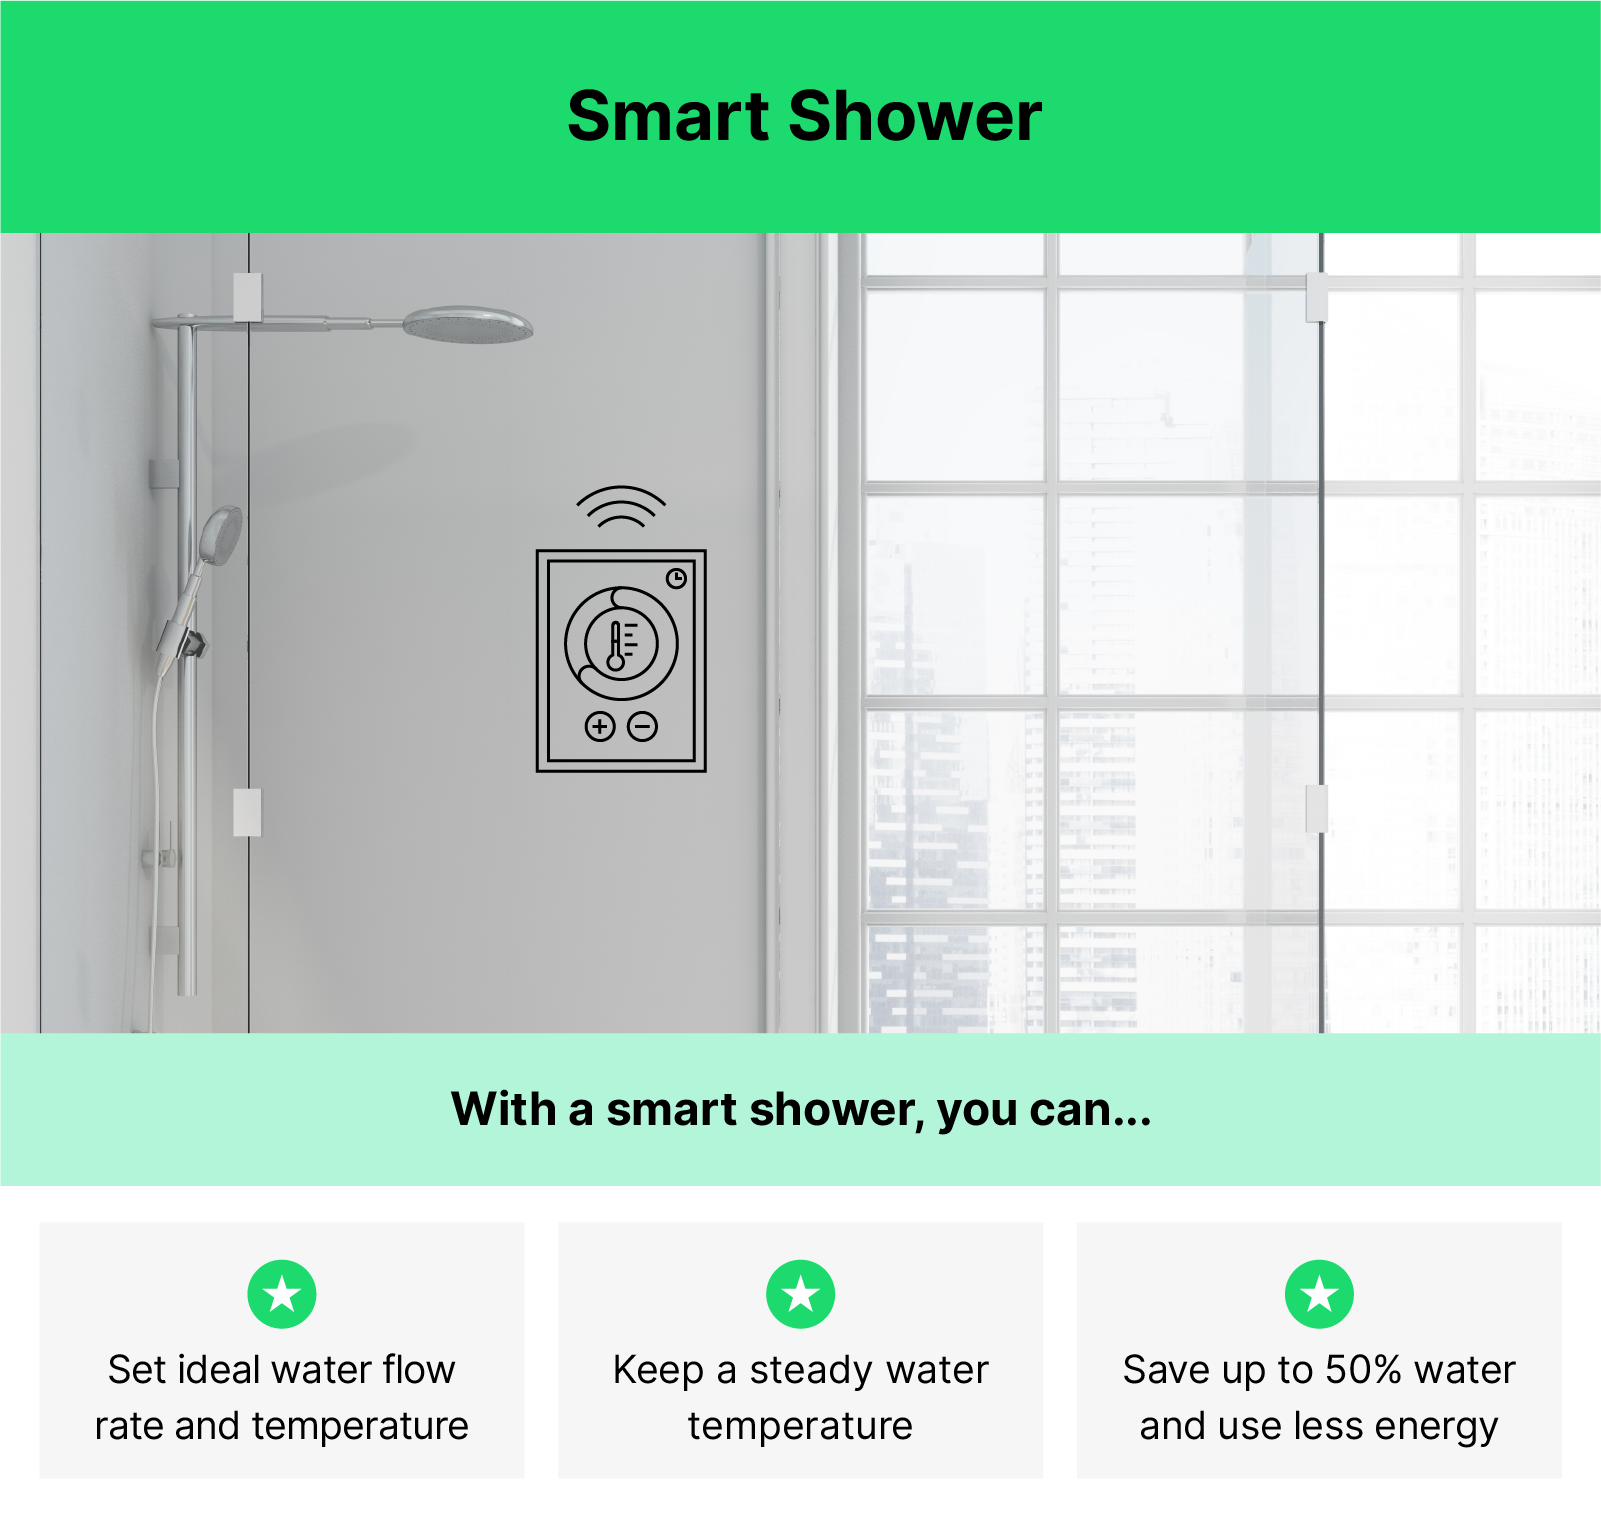 Smart Bathroom Fixtures Offer a More Sanitary, Streamlined Experience